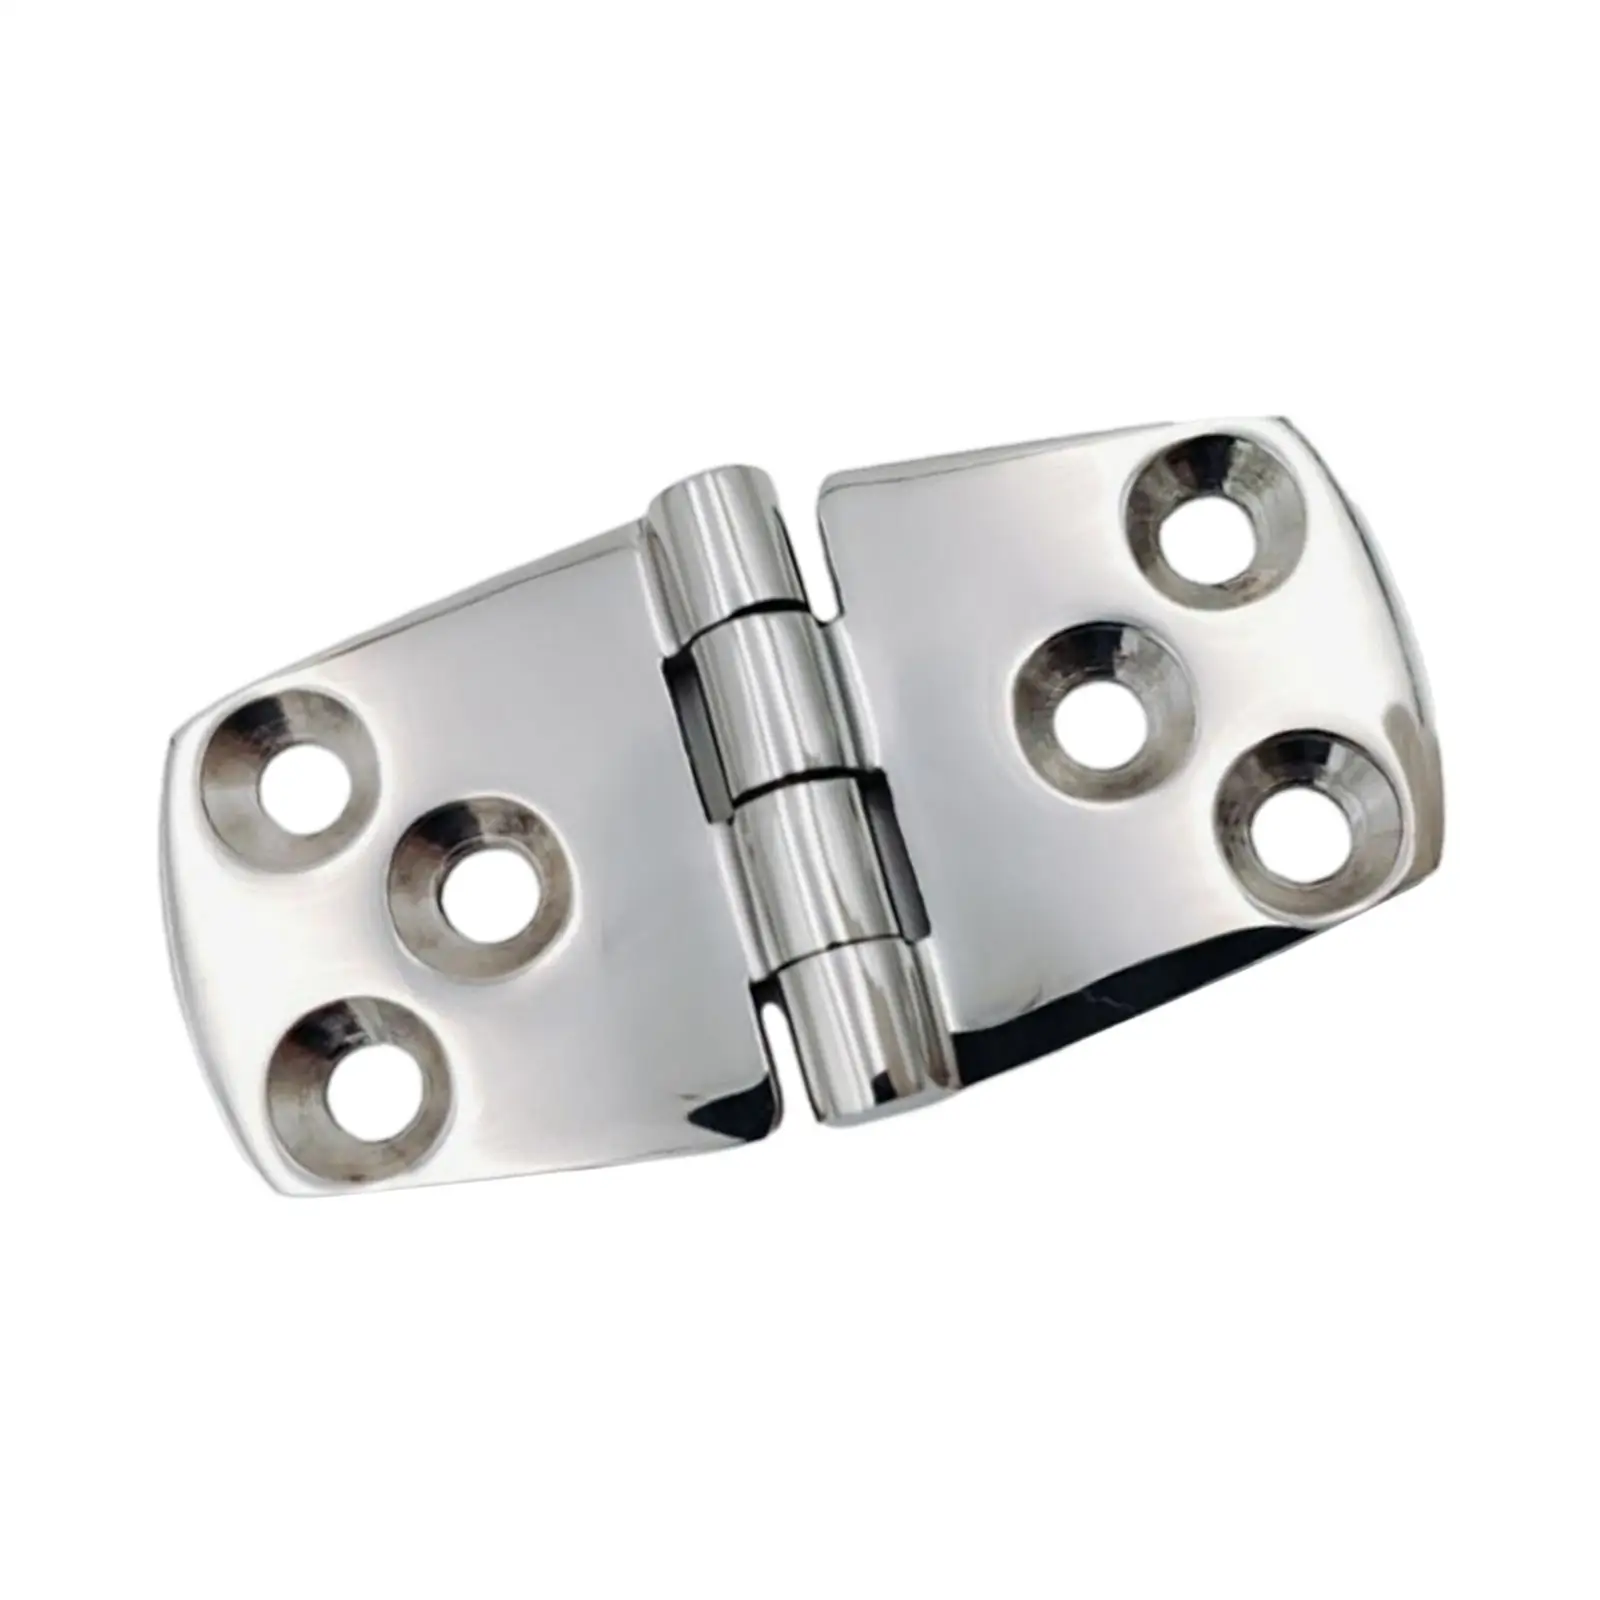 Boat Hinge 6 Holes Cast Solid Boat Strap Hinge Accessories Stainless Steel Polished for Door RV Window Hatch Cabinet